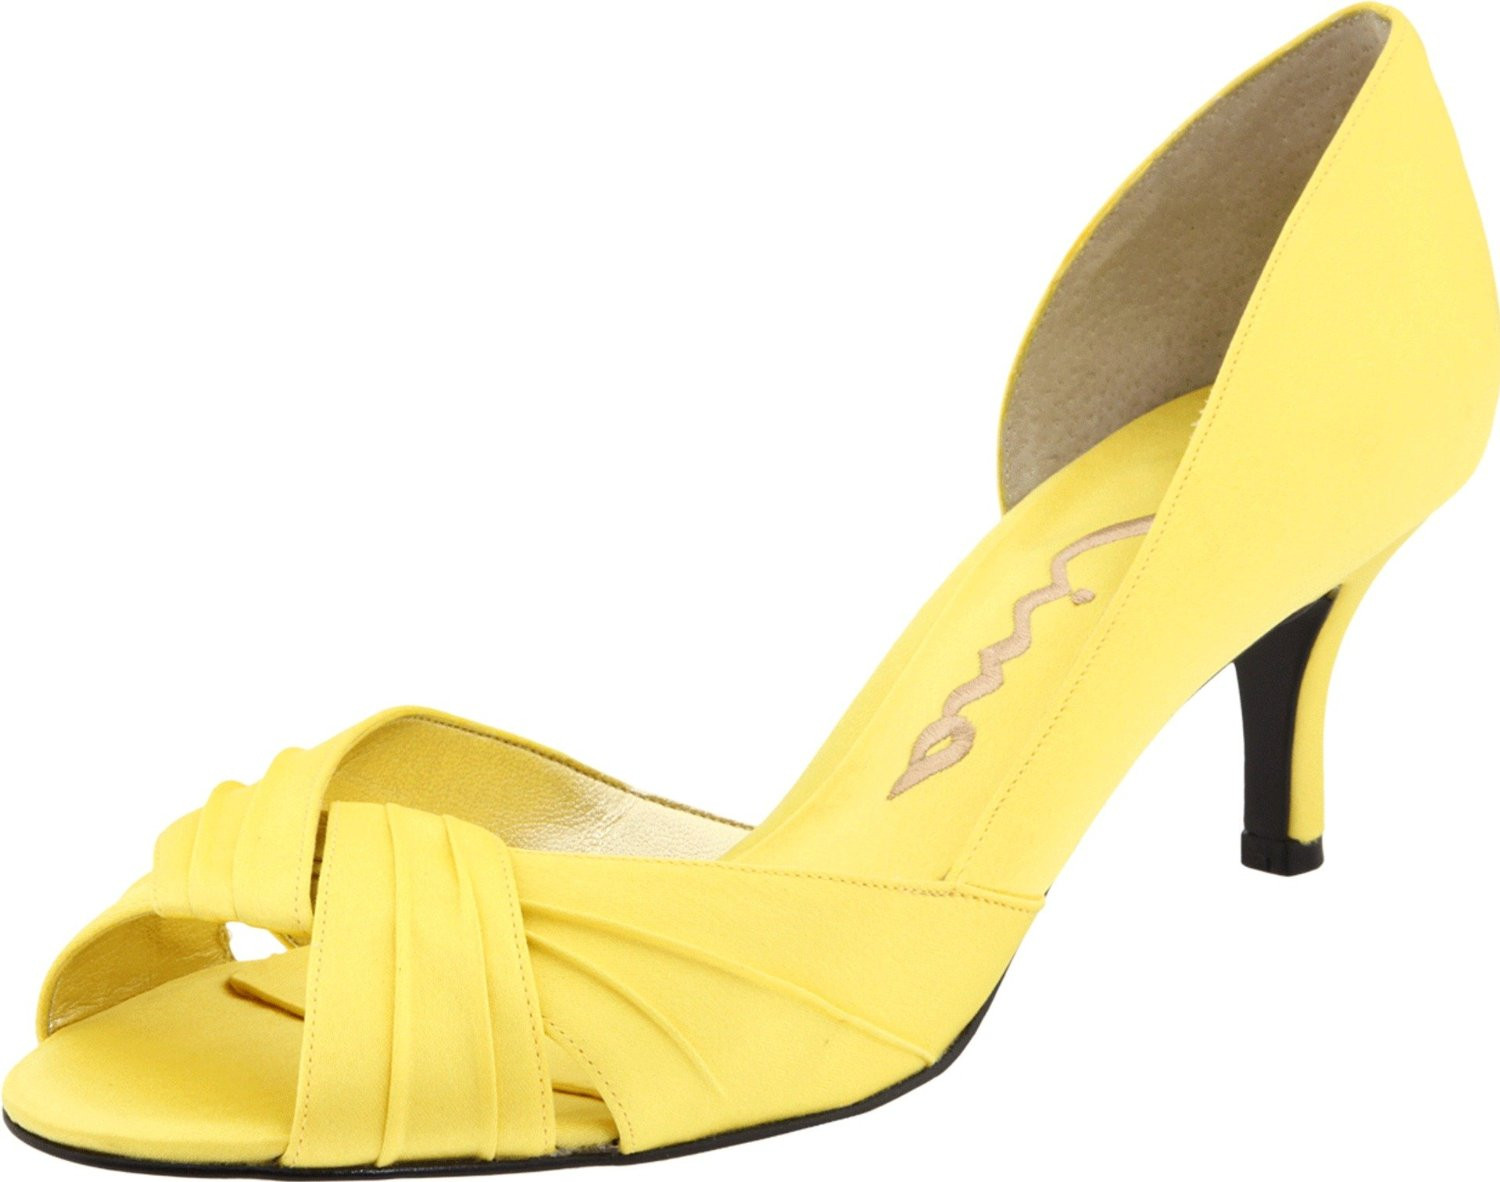 Yellow Dress Shoes Wedding
 online best dresses Yellow shoes for wedding